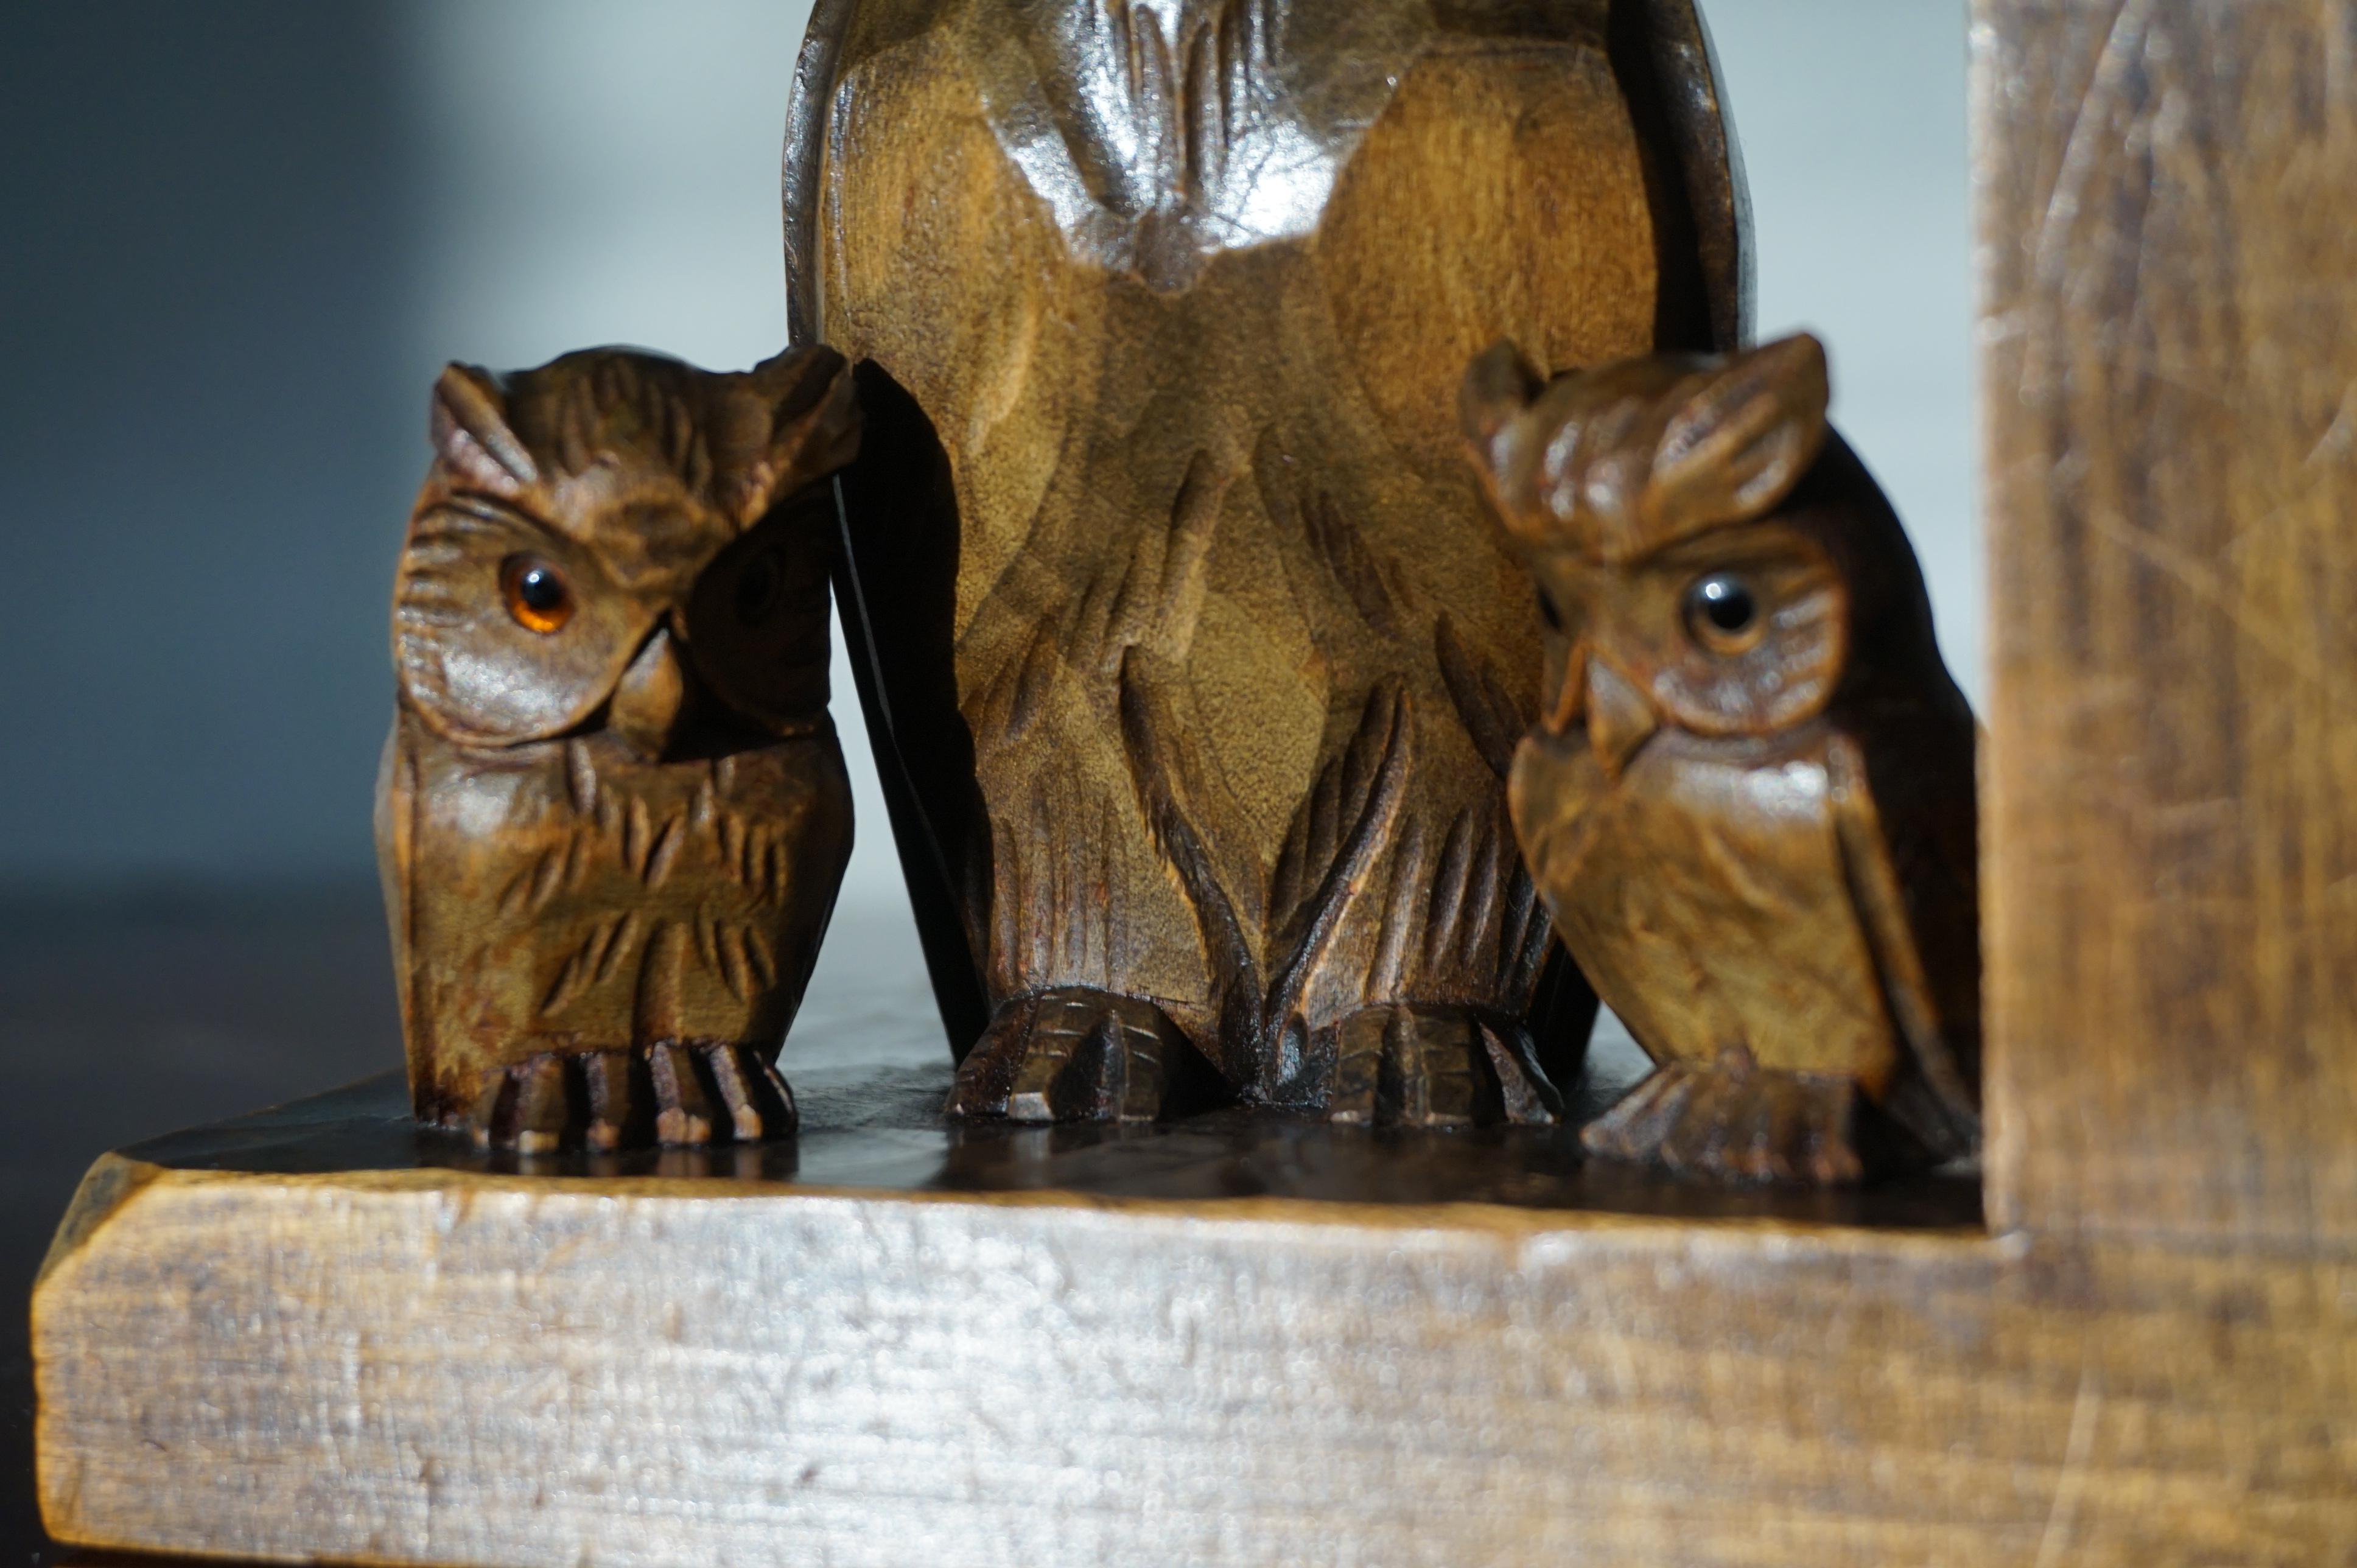 Felt Early 20th Century Art Deco Era Bookends W. Hand Carved Family of Owl Sculptures